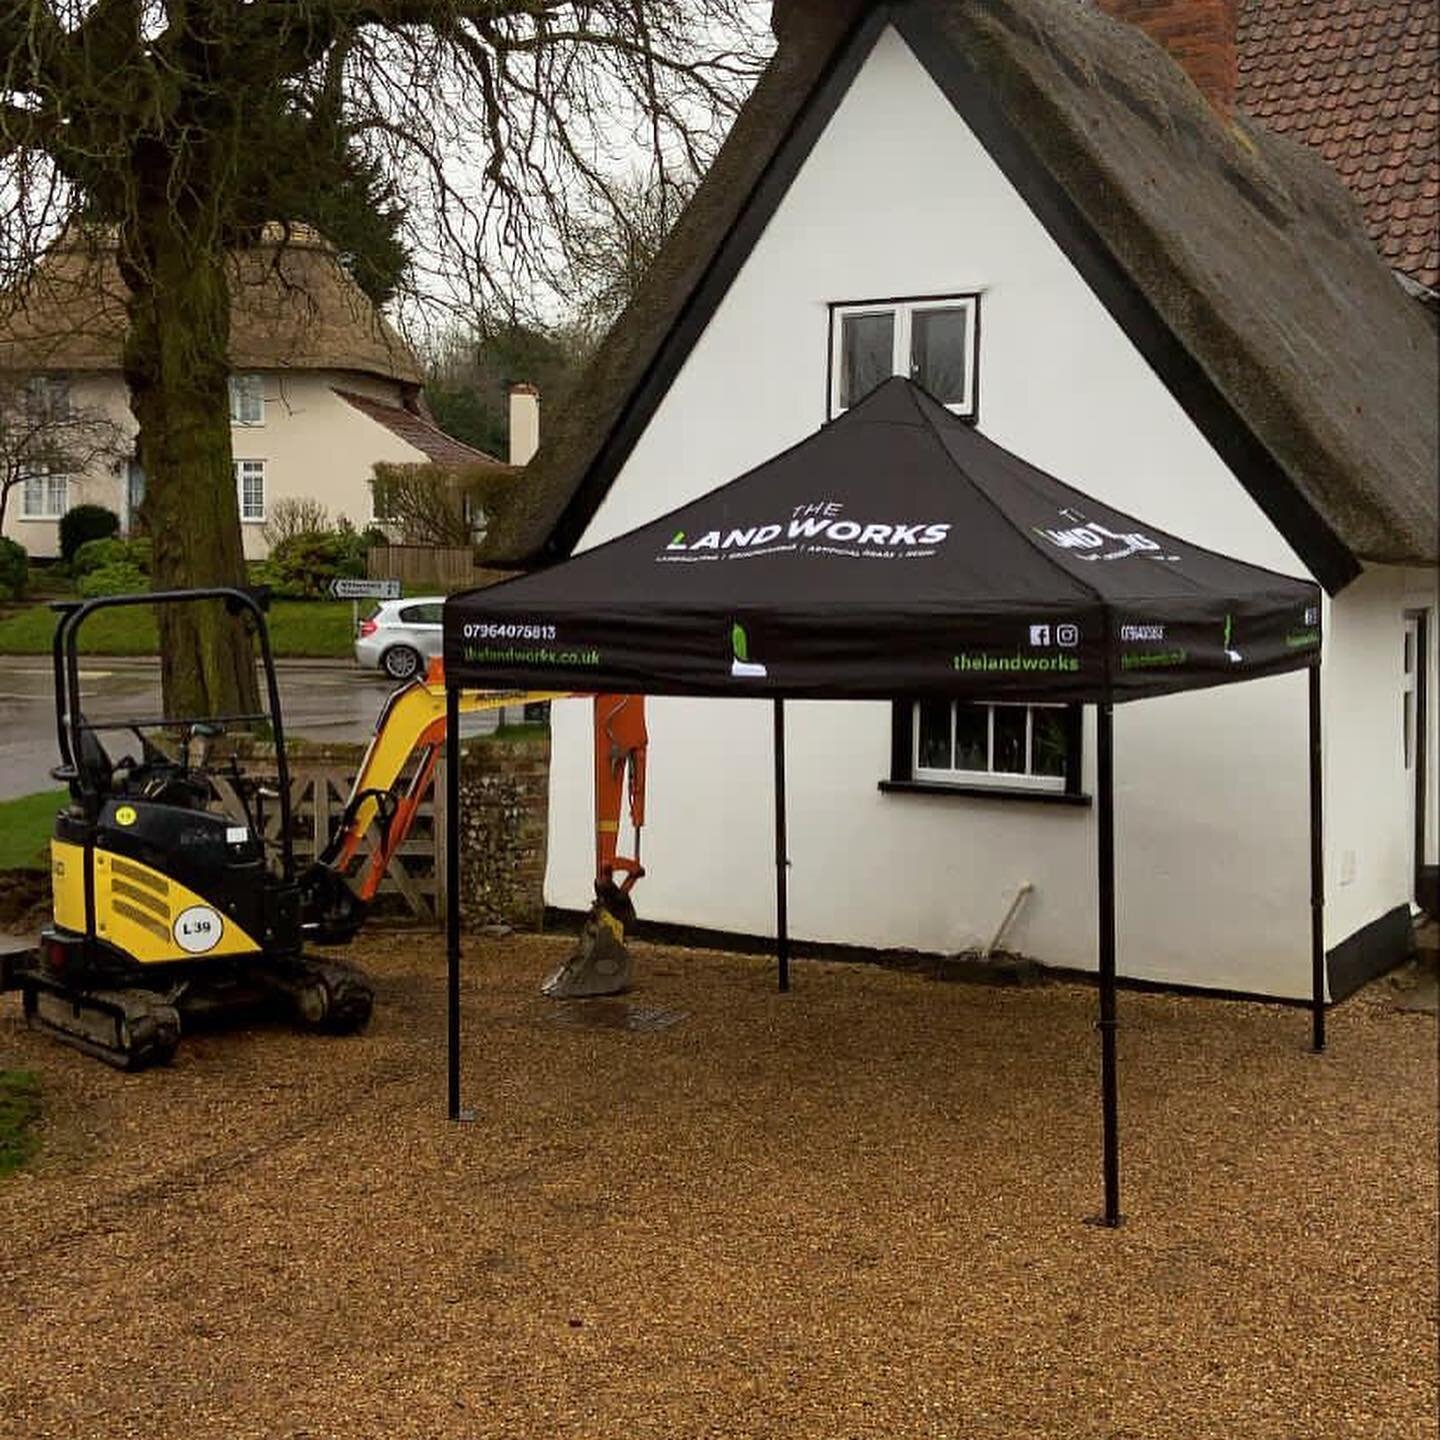 Our new piece of kit has arrived on site - keeping us dry through them rainy days, and cool on them hot days! 🛠 #thelandworks #cambridge #landscapers #groundworks #artificialgrass #resin #gazebo